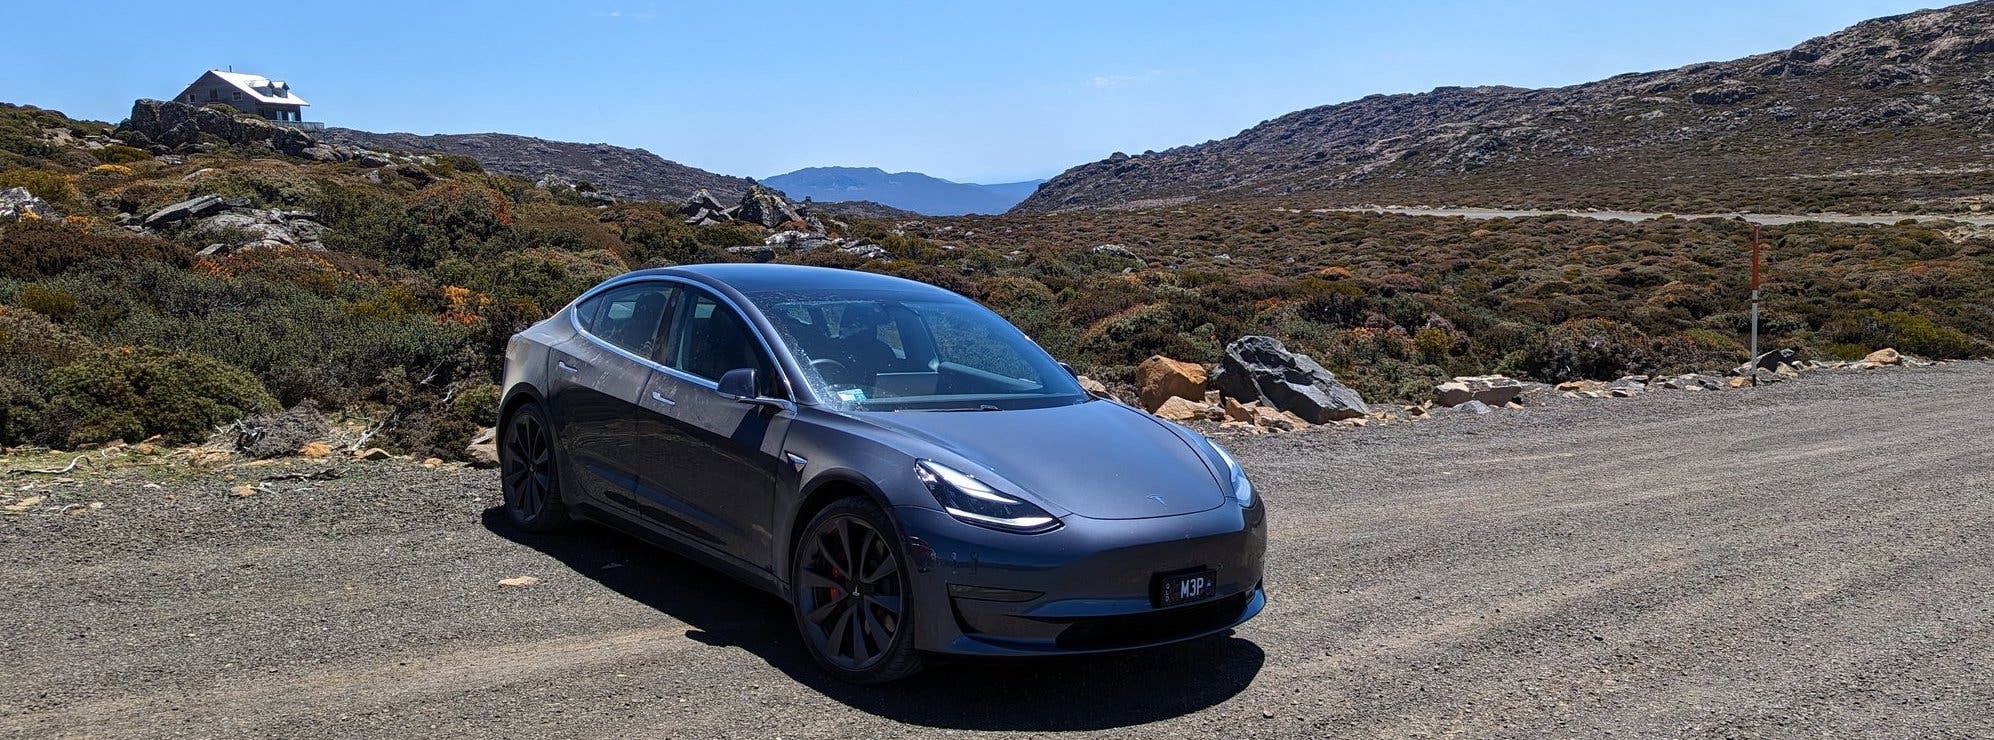 Tesla Charging Up Sunshine Coast — Road Tripping Made Easy, But Still Some  Hiccups - CleanTechnica